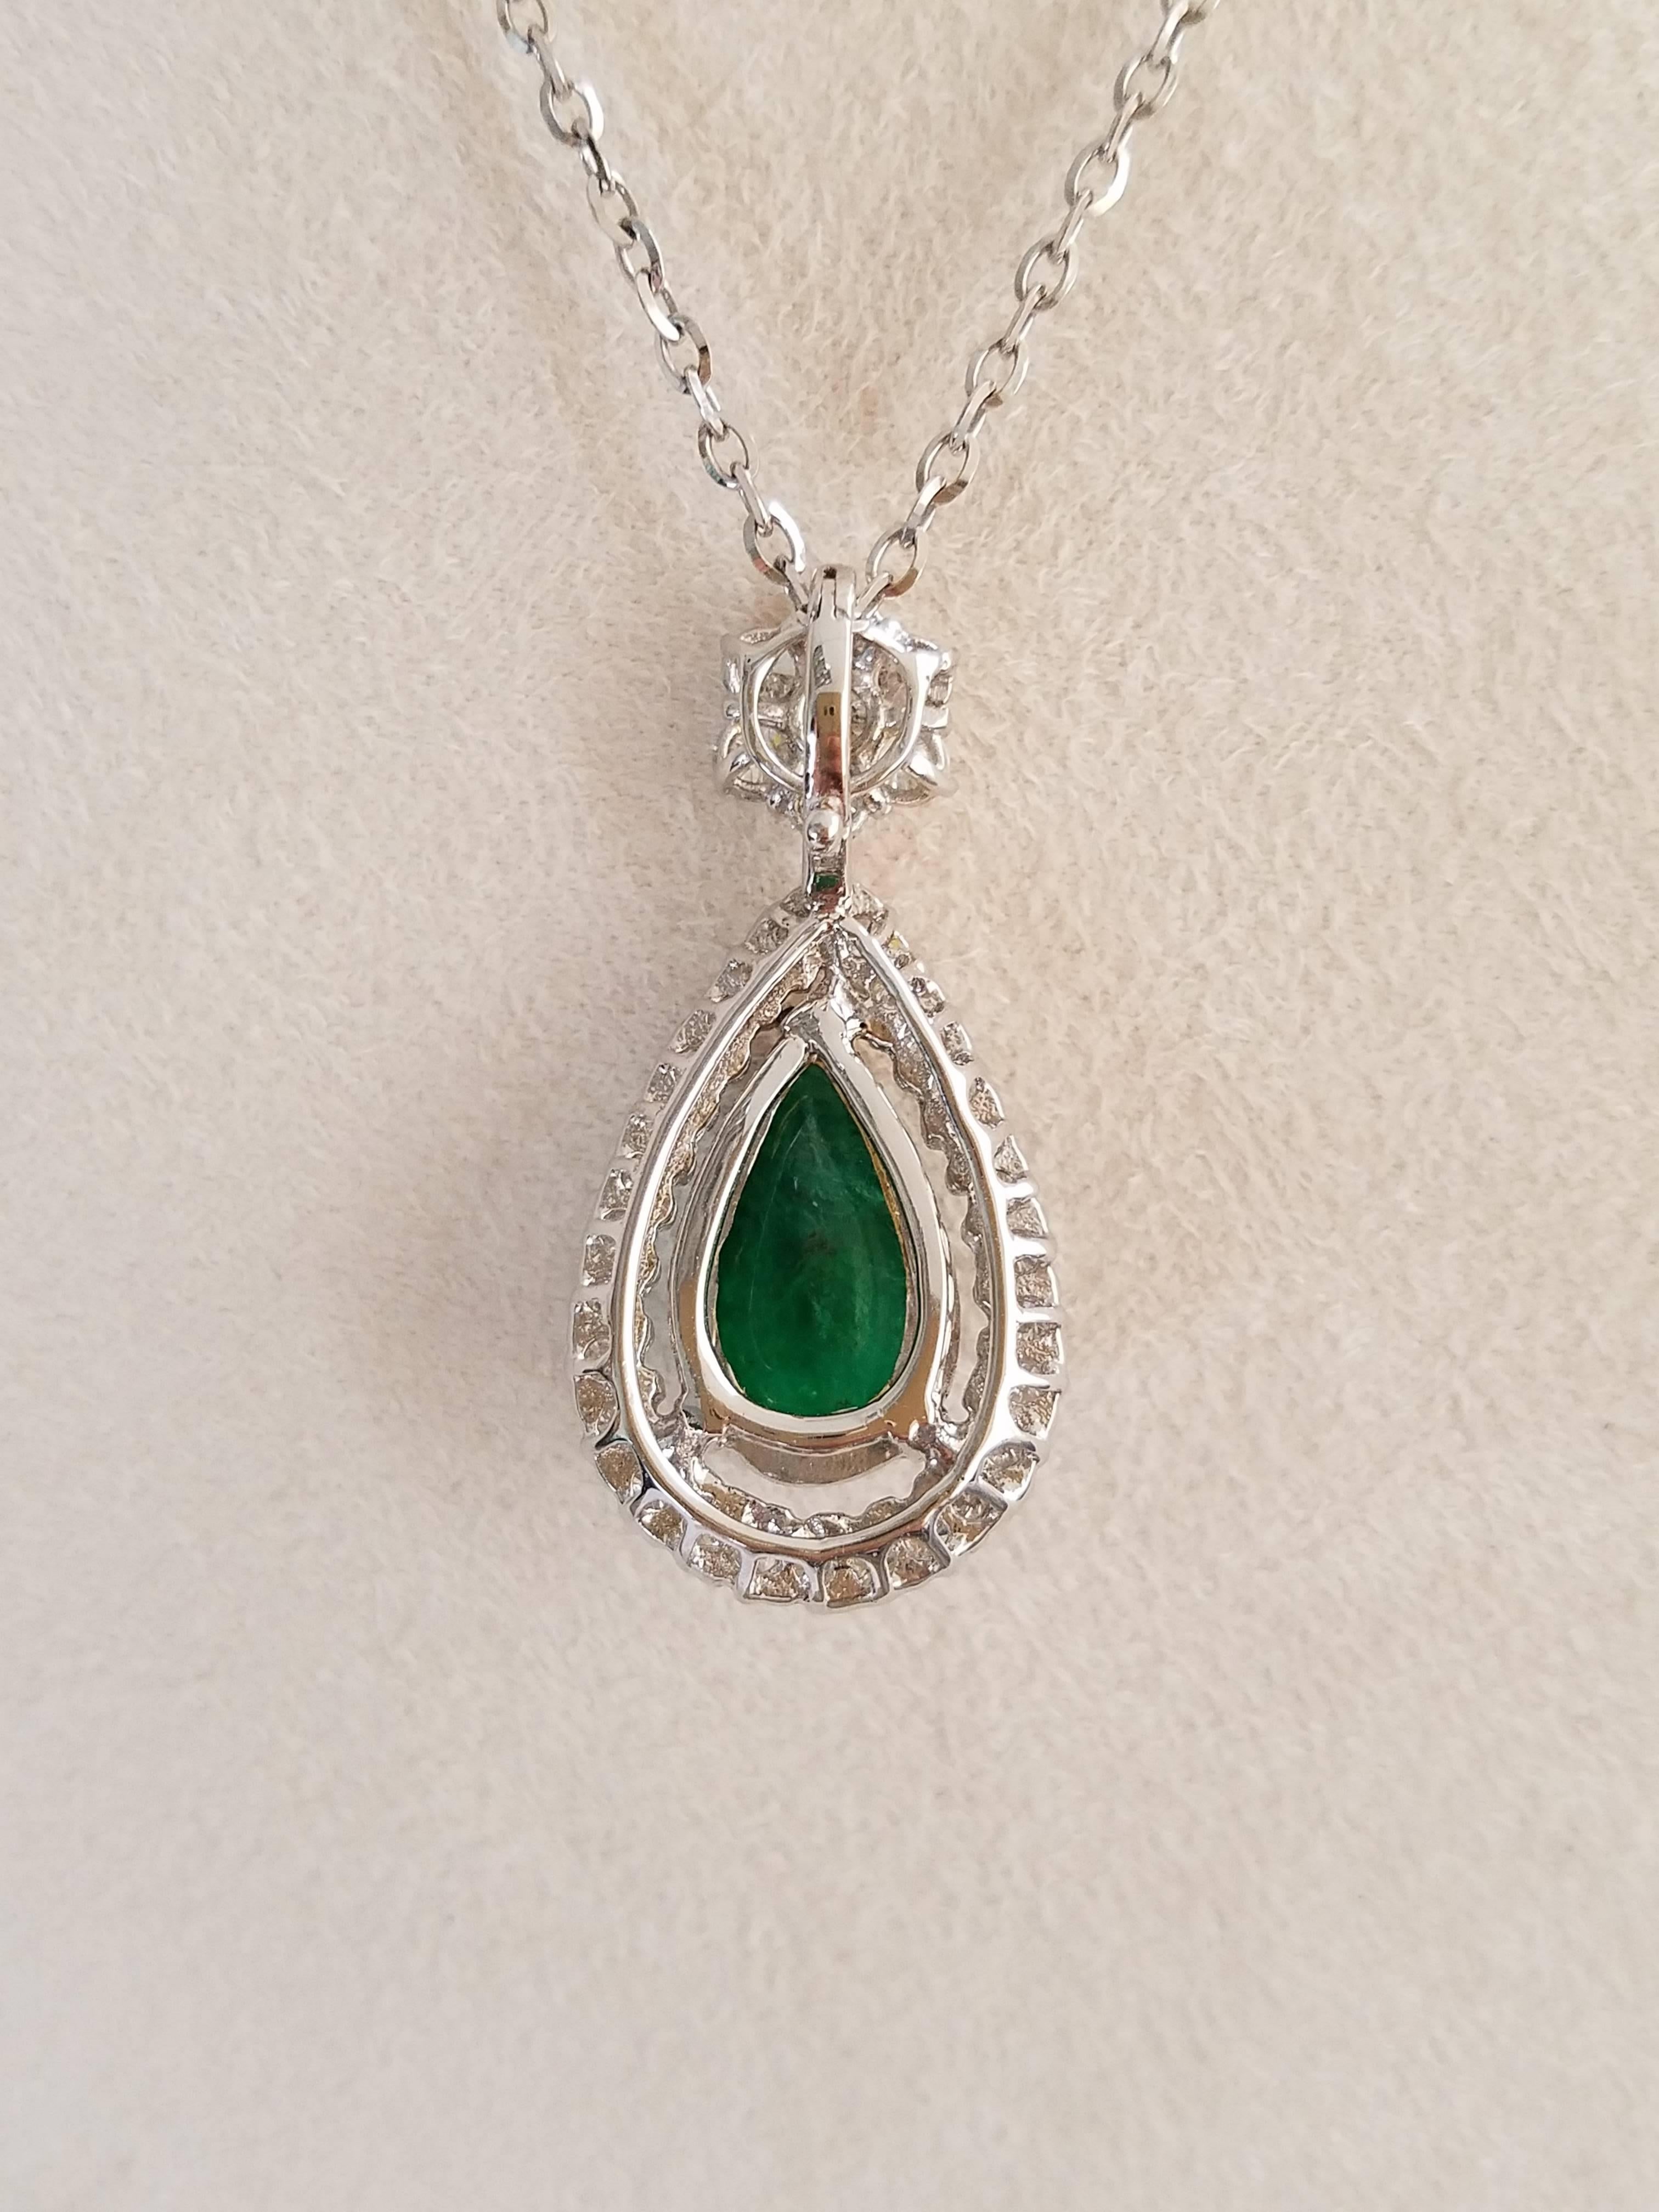 An elegant and simple pendant, with a pear shaped Zambian Emerald cabochon centre stone surrounded by brilliant cut white Diamonds, all set in 18K white gold. 

Stone Details: 
Stone: Zambian Emerald
Carat Weight: 8.06 Carats

Diamond Details: